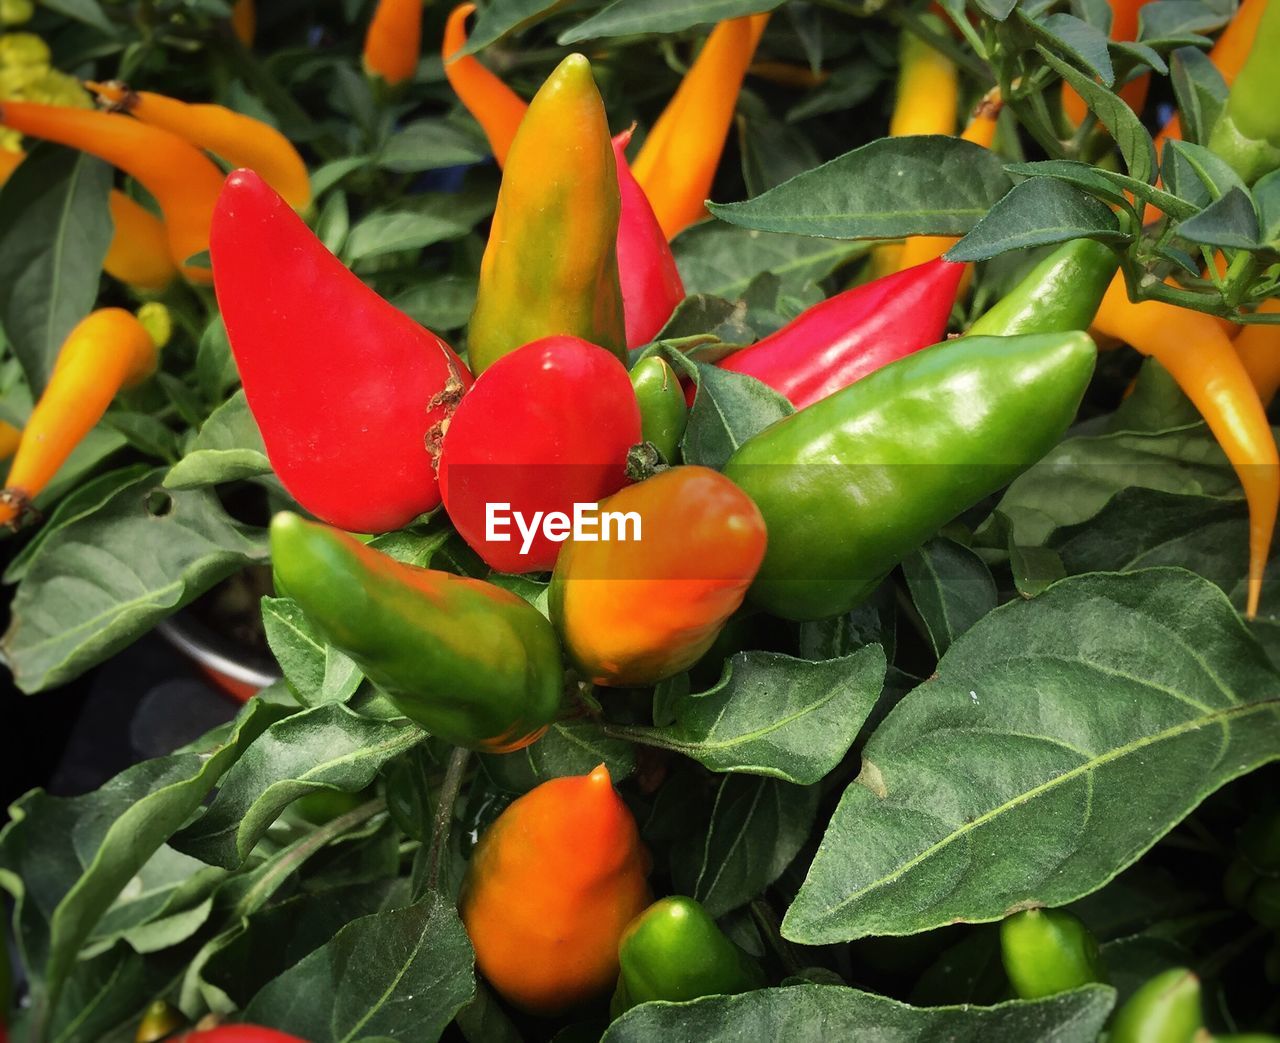 Full frame shot of chili peppers growing on plant